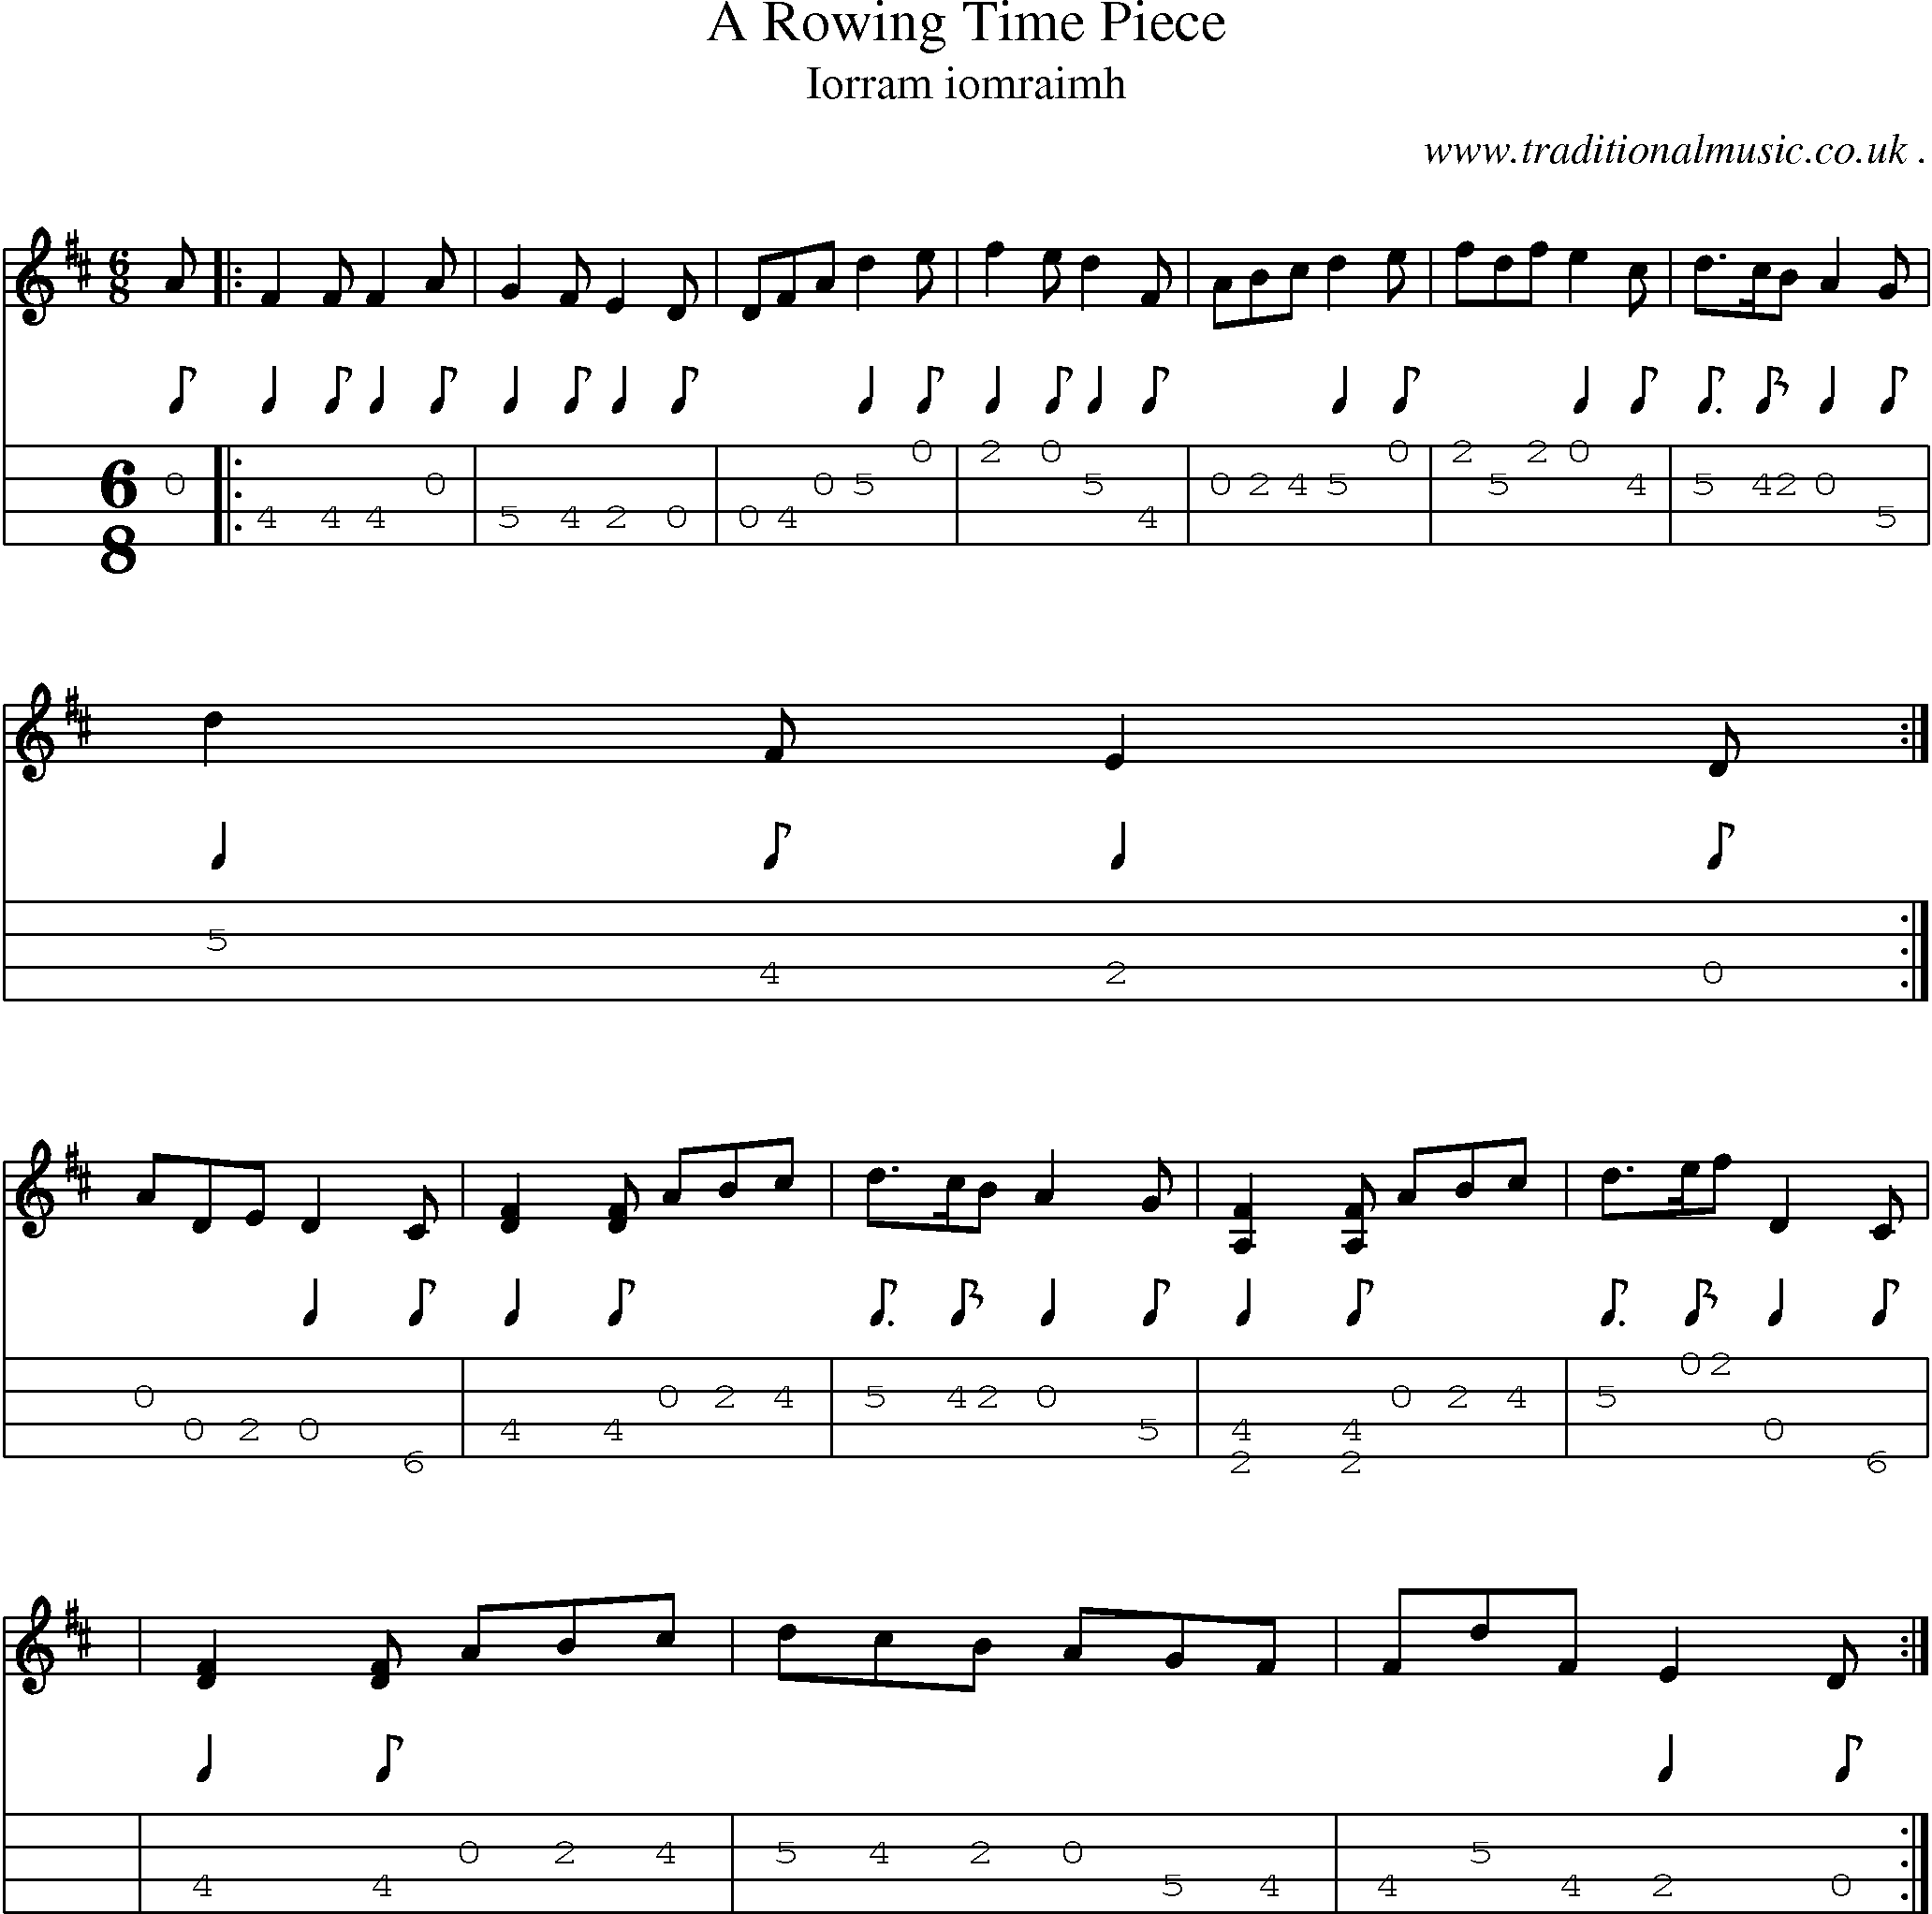 Sheet-music  score, Chords and Mandolin Tabs for A Rowing Time Piece